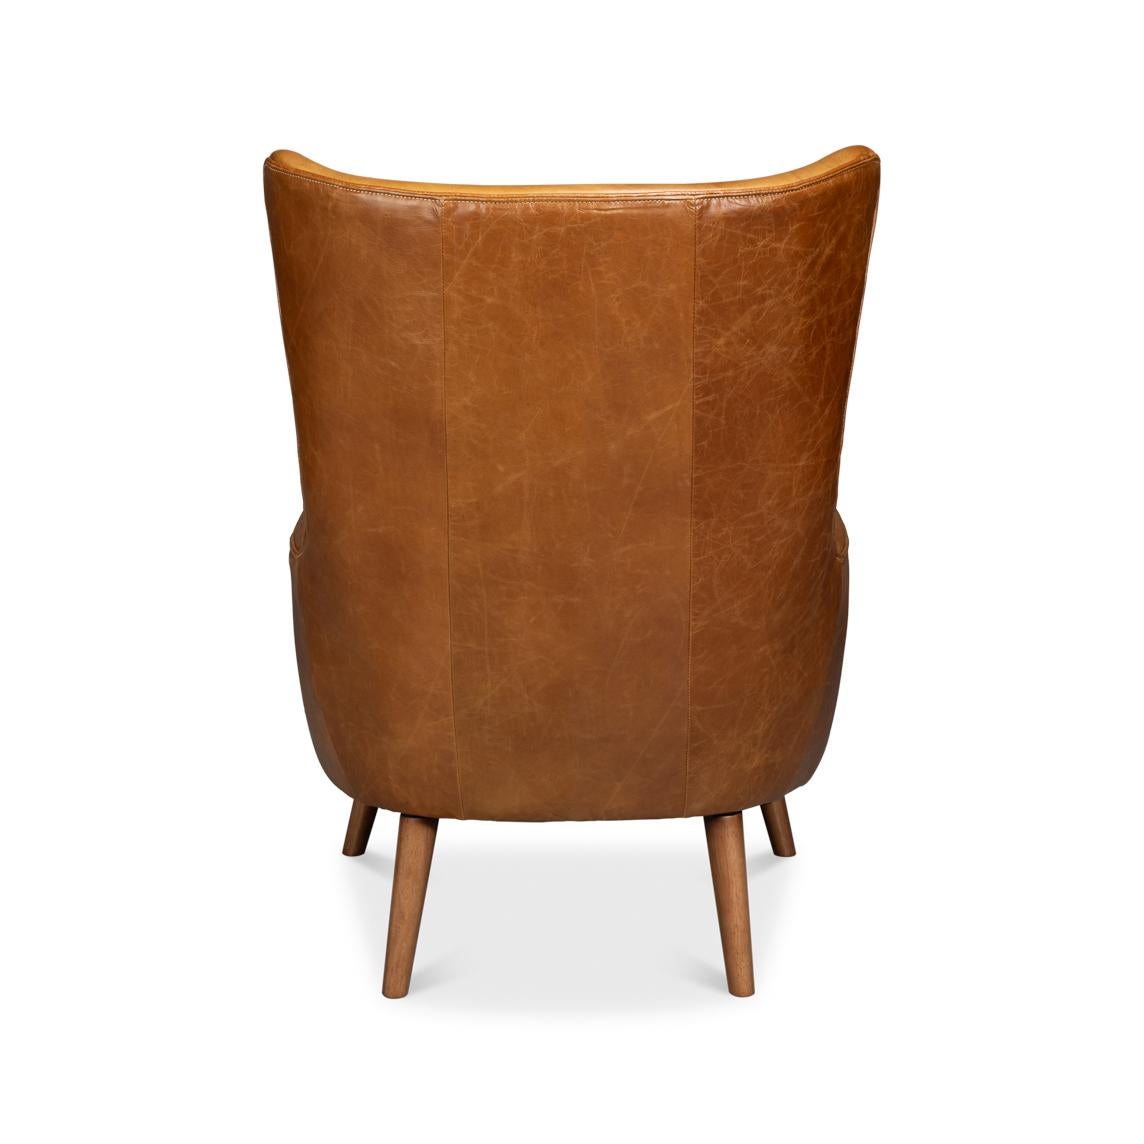 Asian Retro Caramel Leather Wingback Chair For Sale